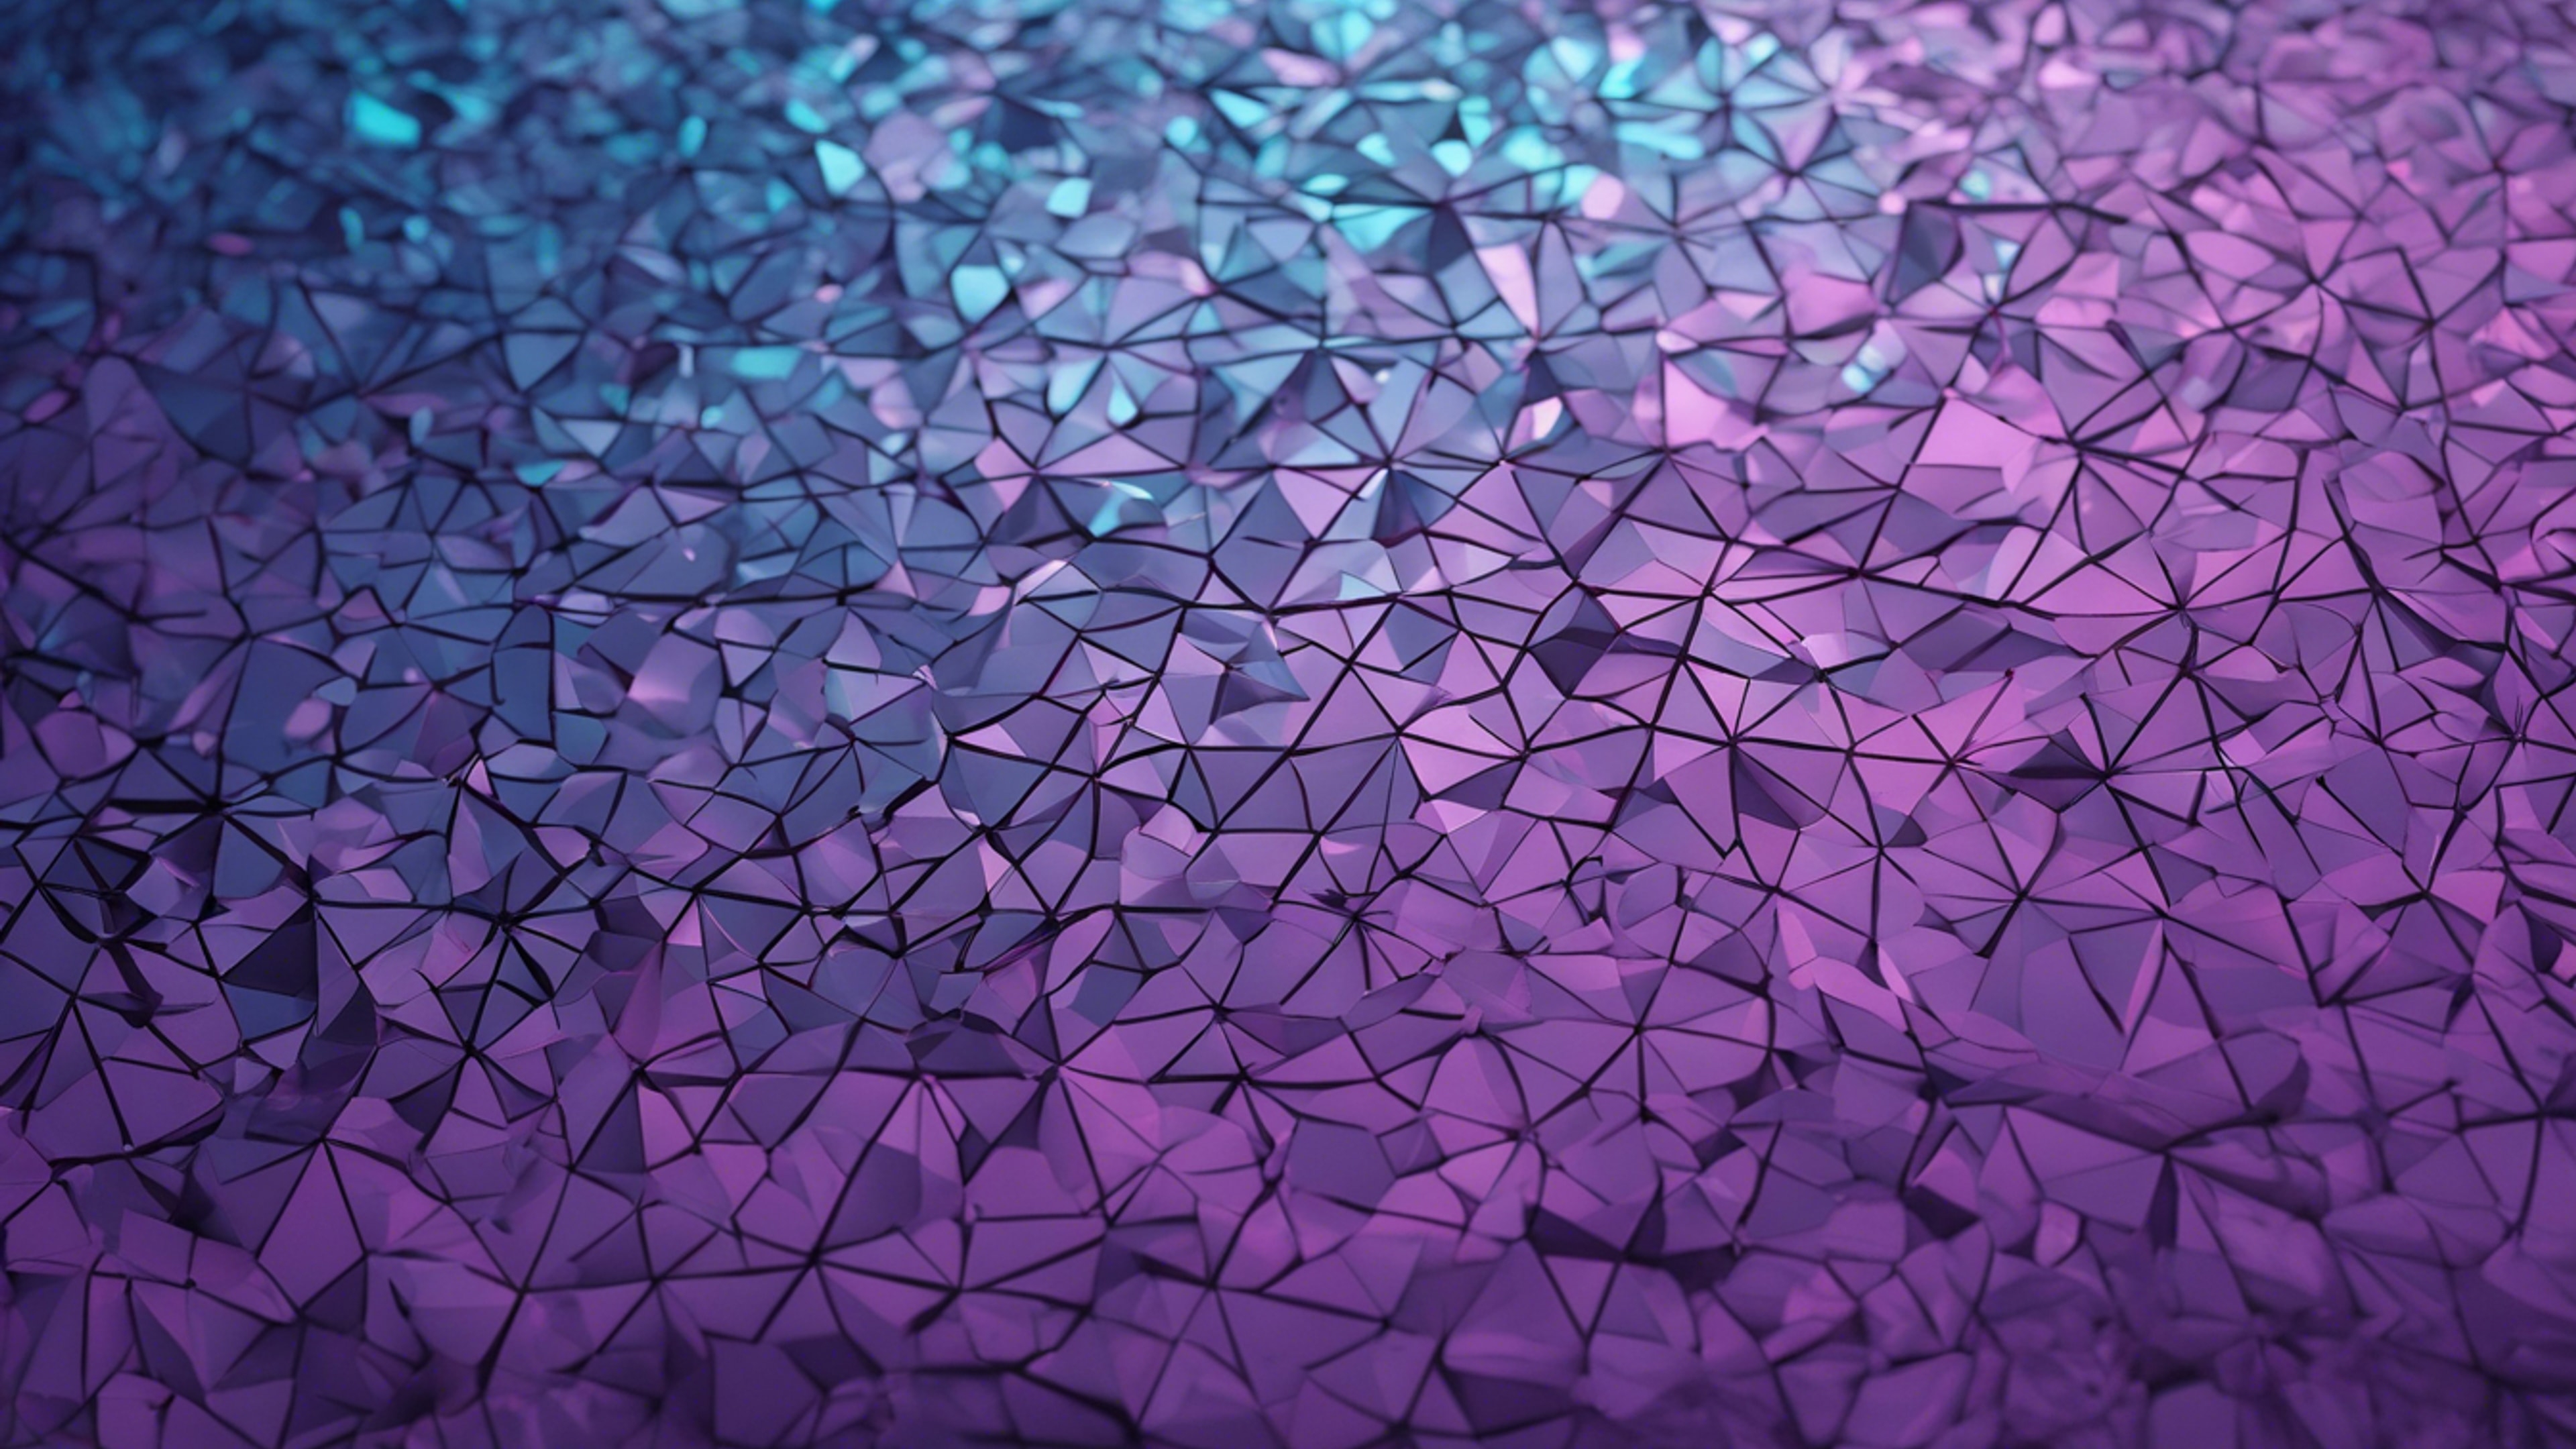 A minimalistic geometric pattern with gradients of cool blues and rich purples. Tapet[0965c8f37dc94faa9227]